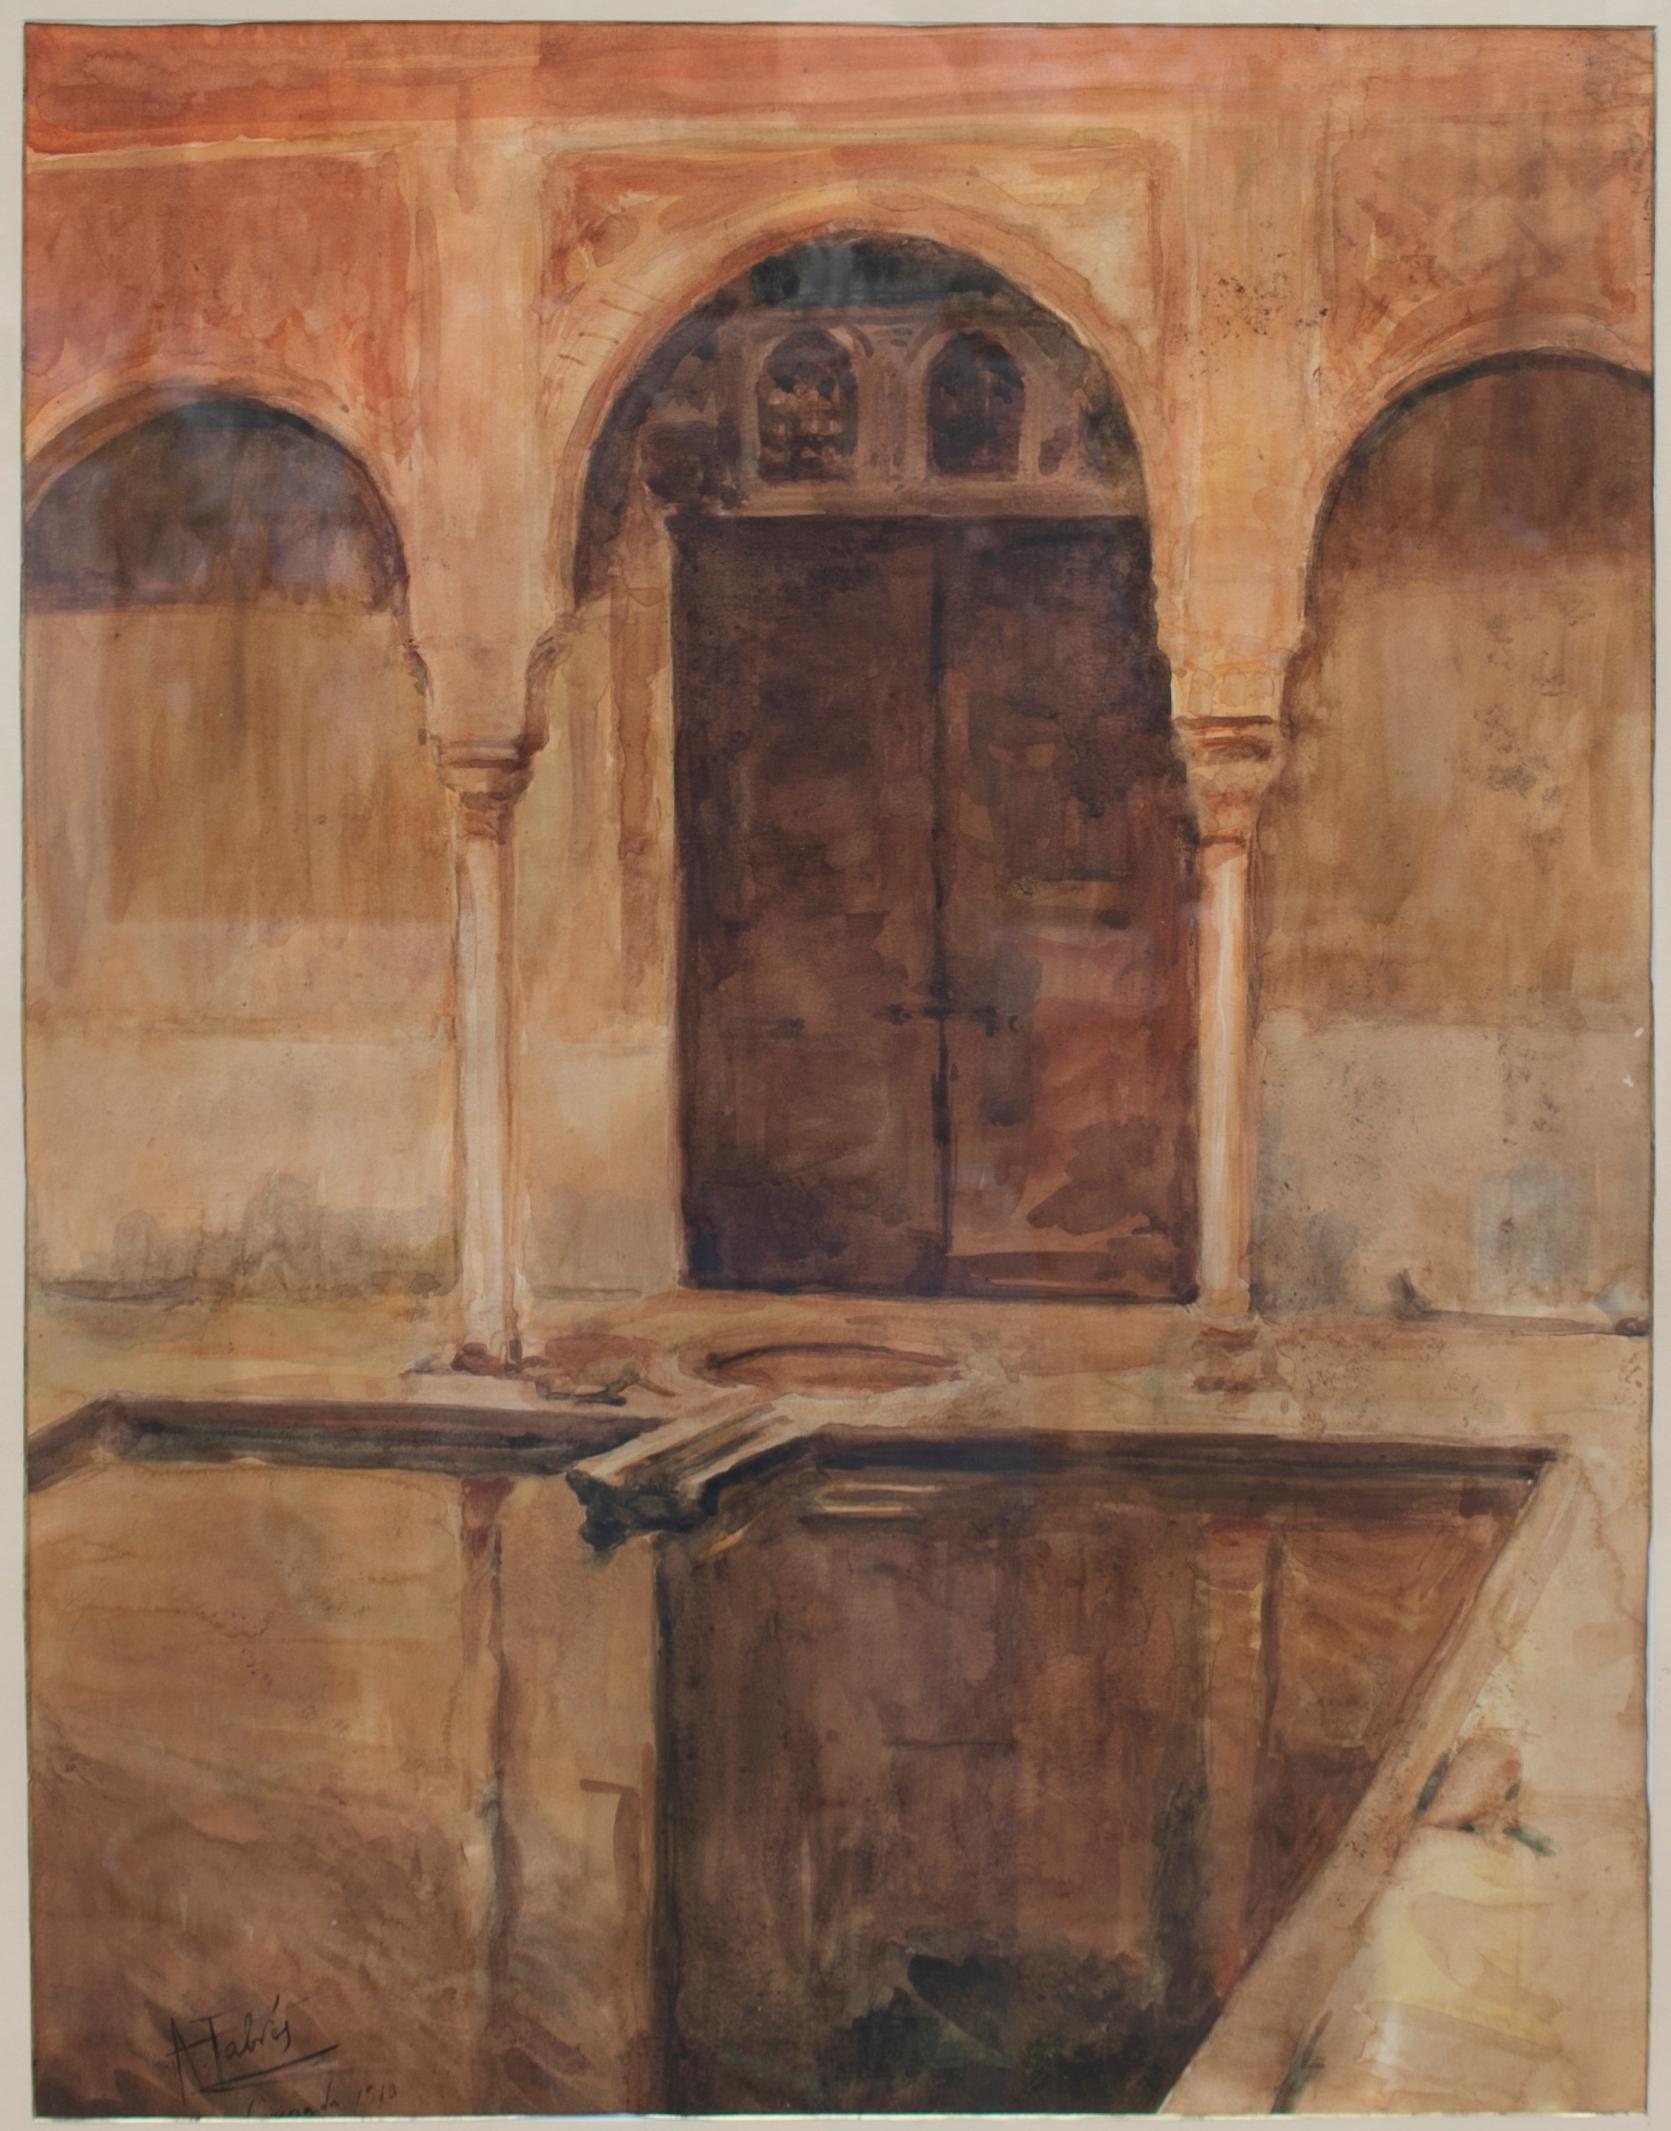 19th century Orientalist Spanish architecture watercolor.

Dimensions with frame: 90 x 75 x 5.